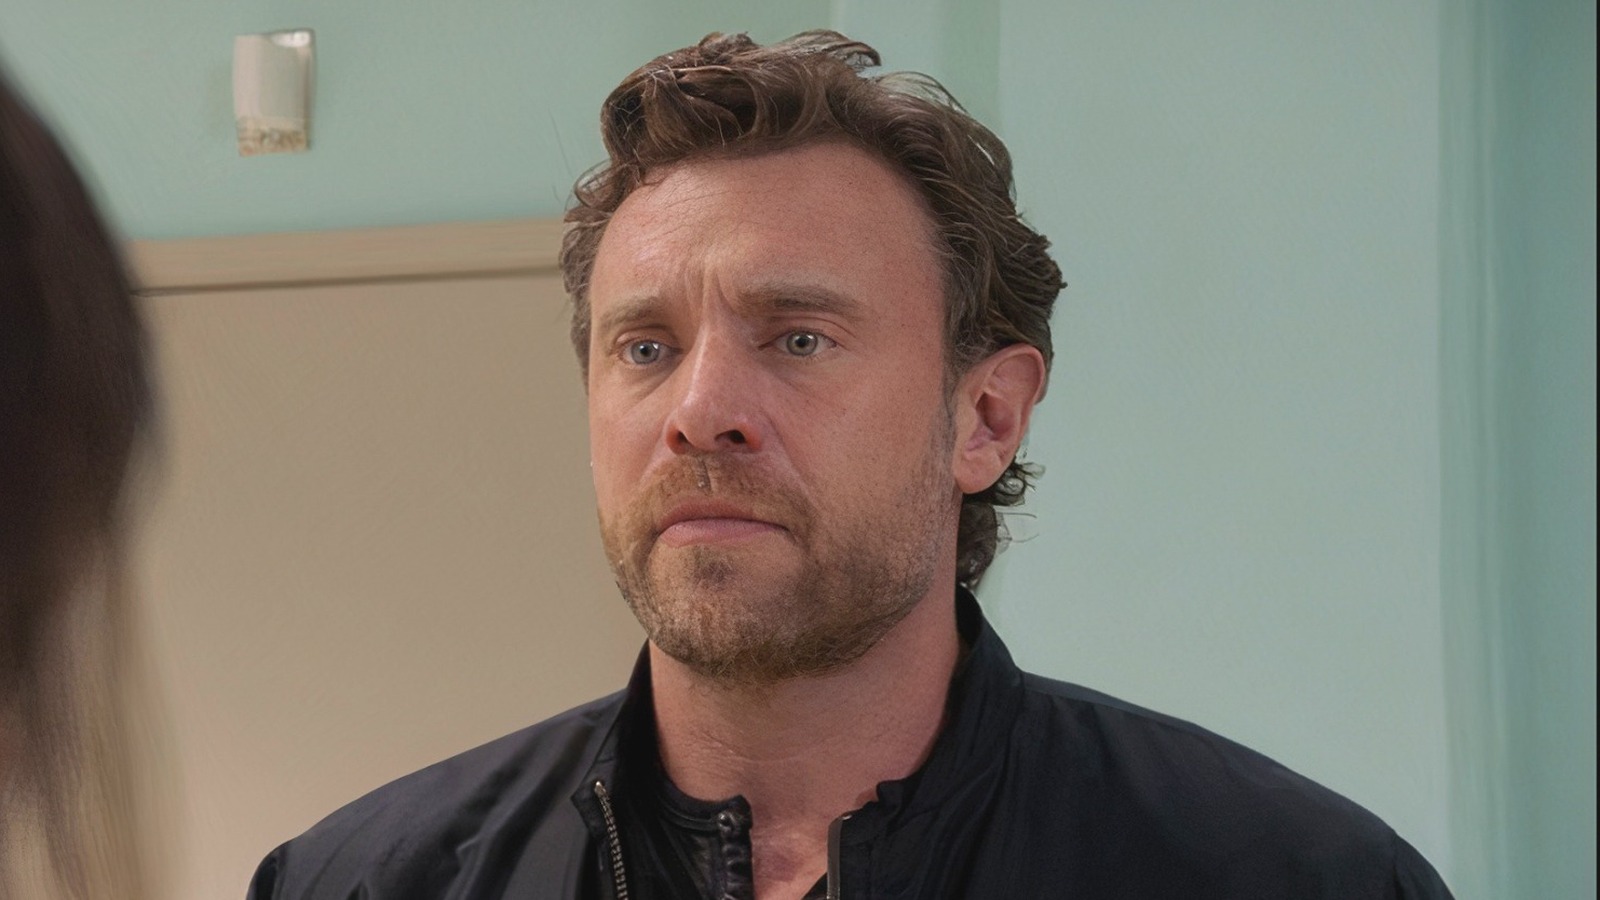 Who Did Late Soap Star Billy Miller Play On NCIS?